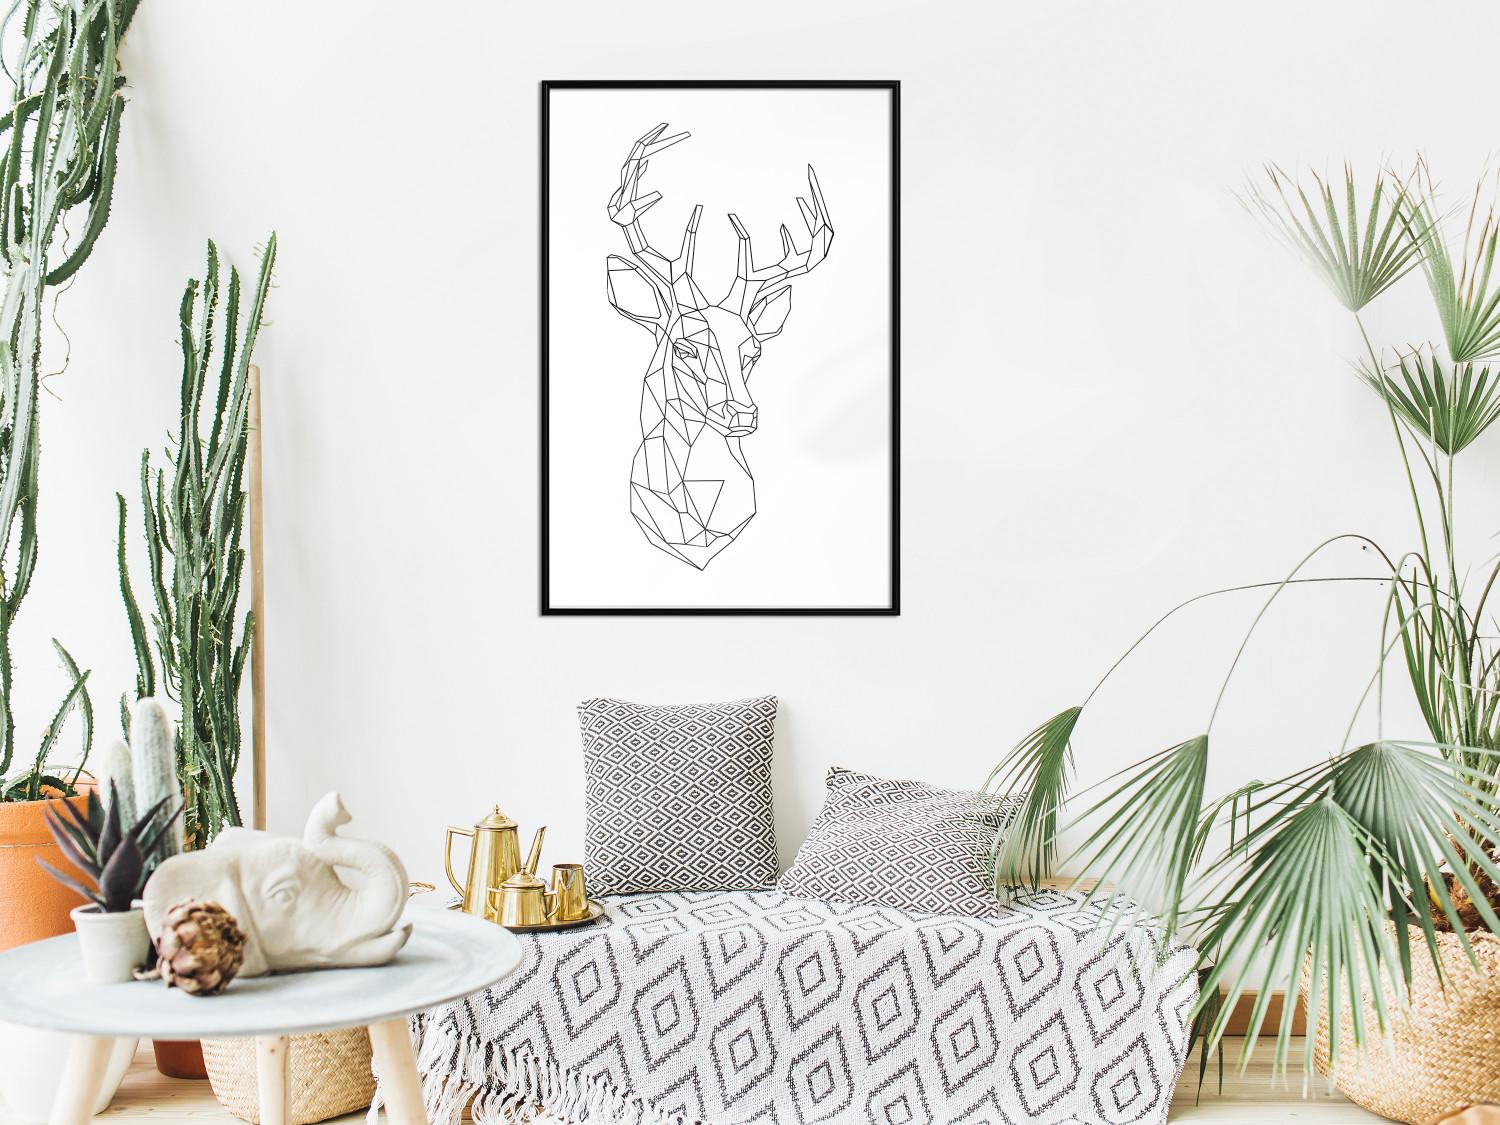 Gallery wall Geometric deer - black line art with a horned animal and white background